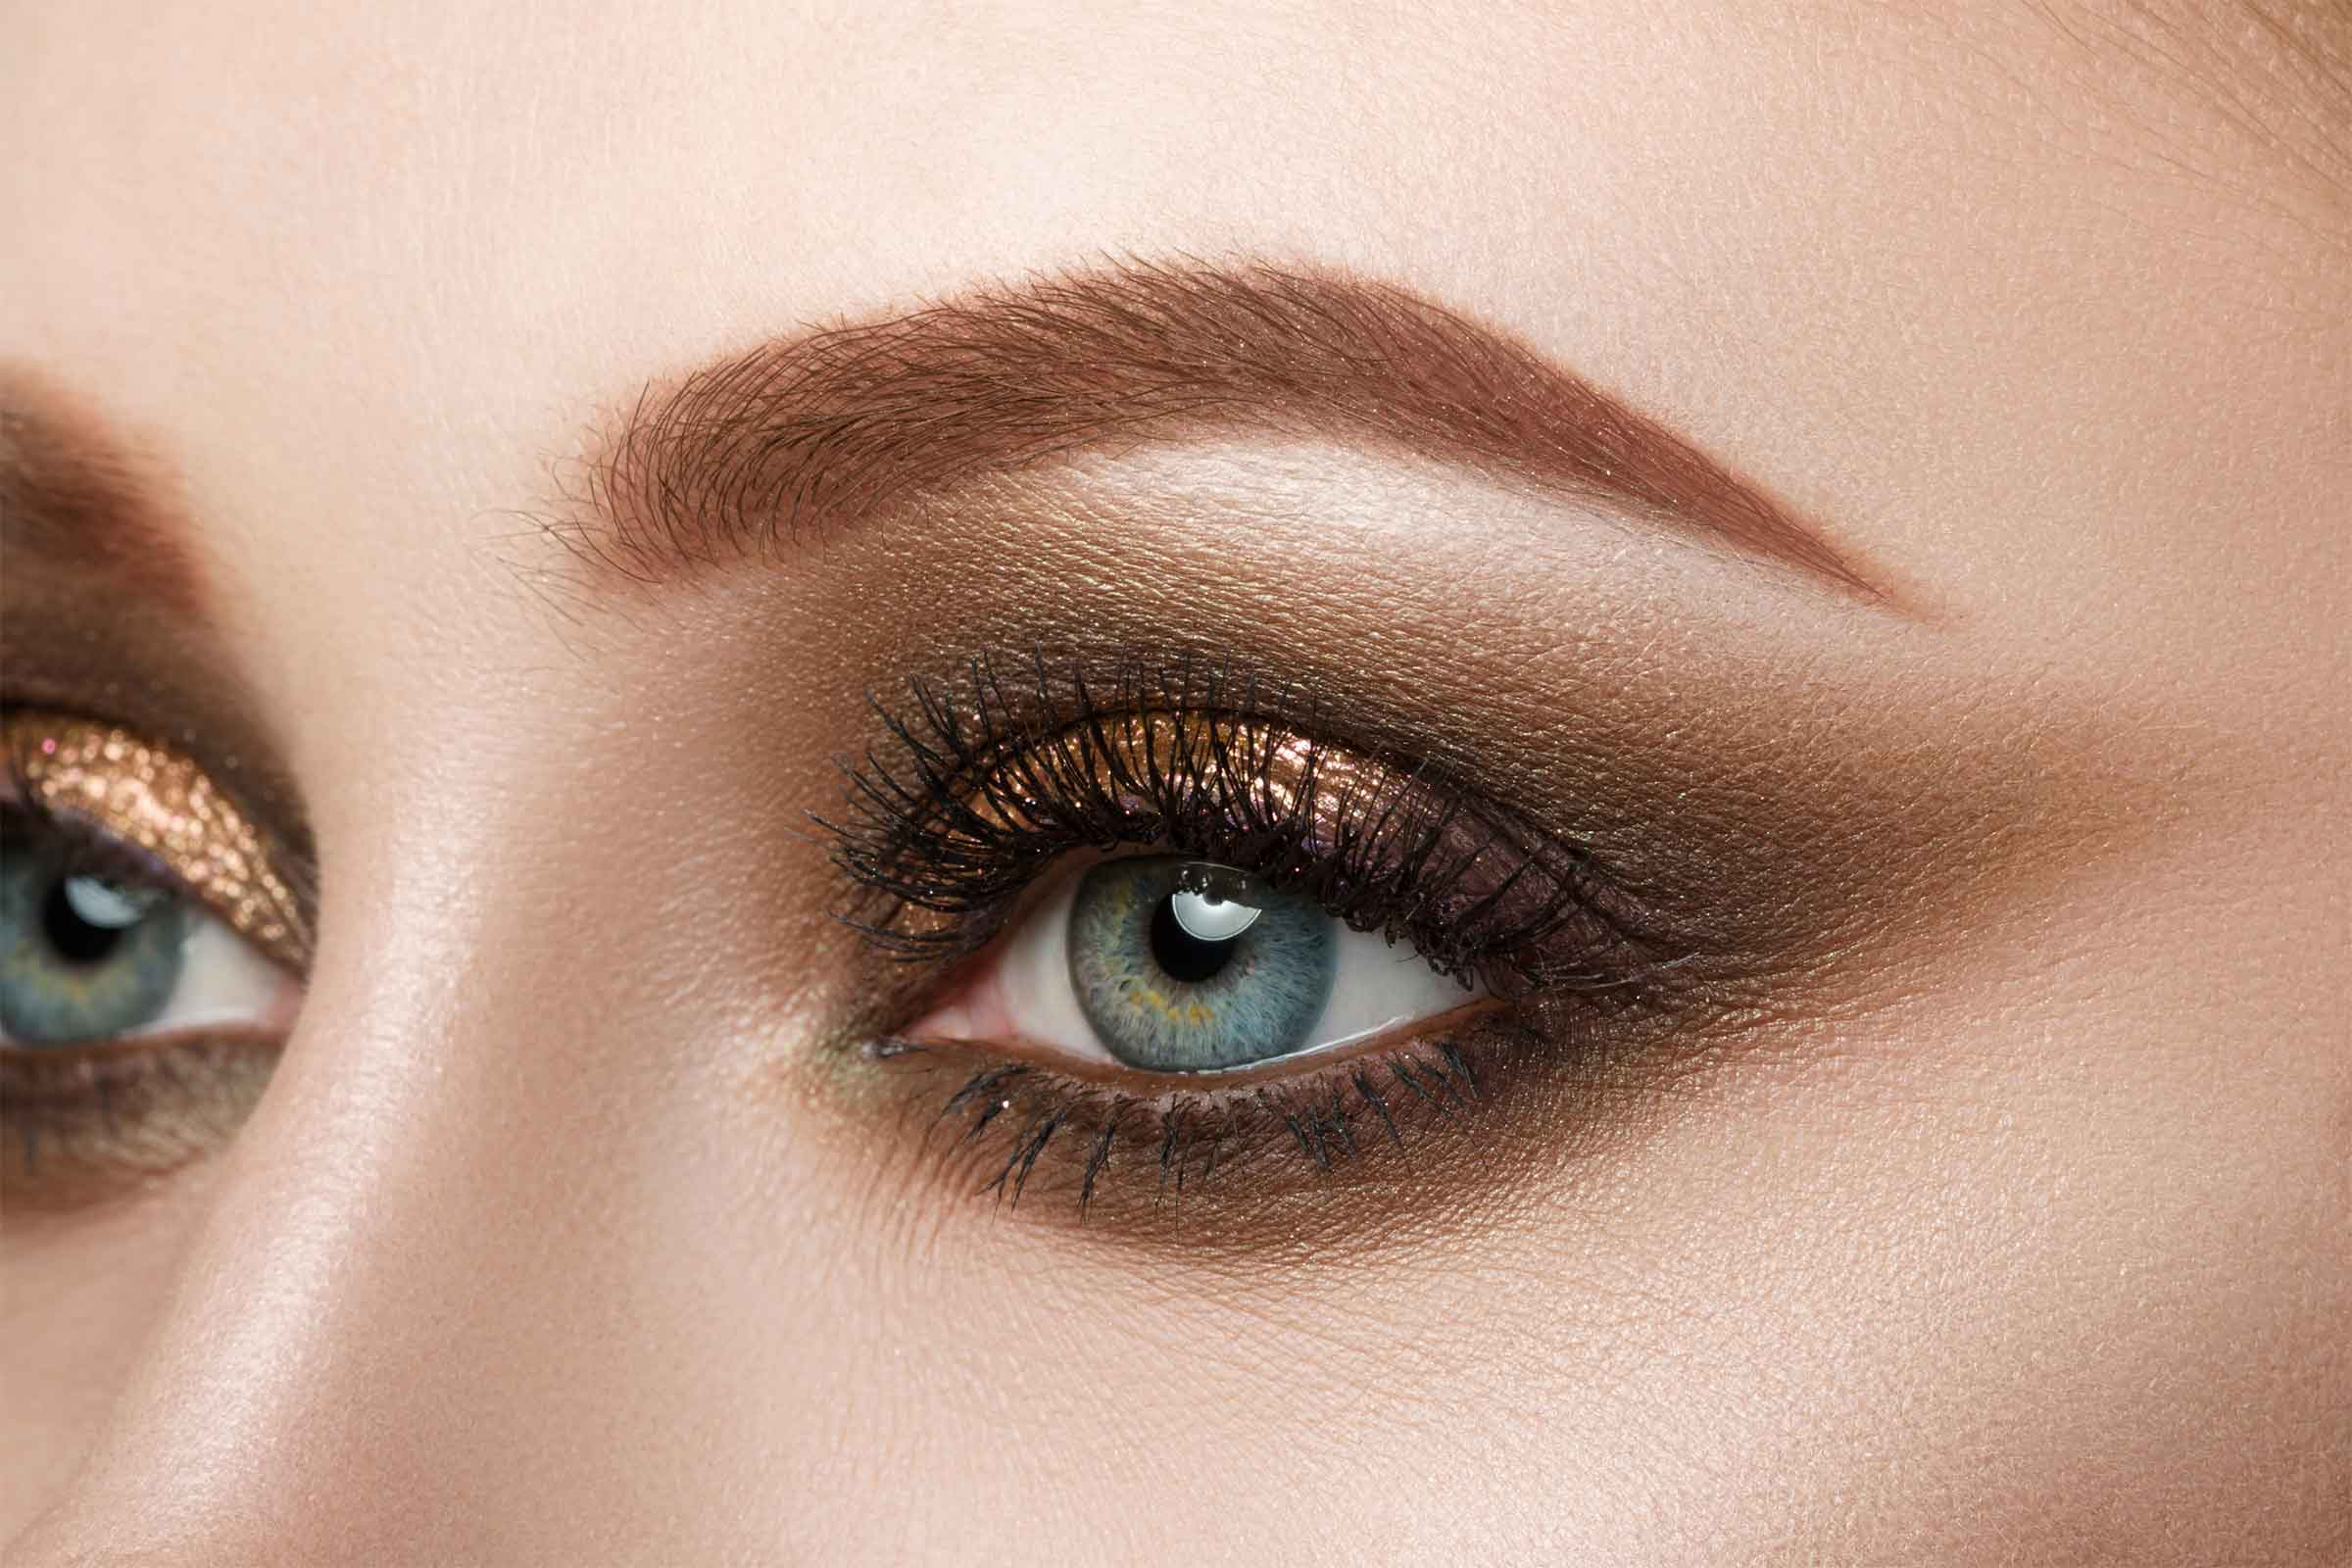 Pictures Of Eye Makeup Eye Makeup Tips 7 Ways To Make Your Eyes Pop Readers Digest